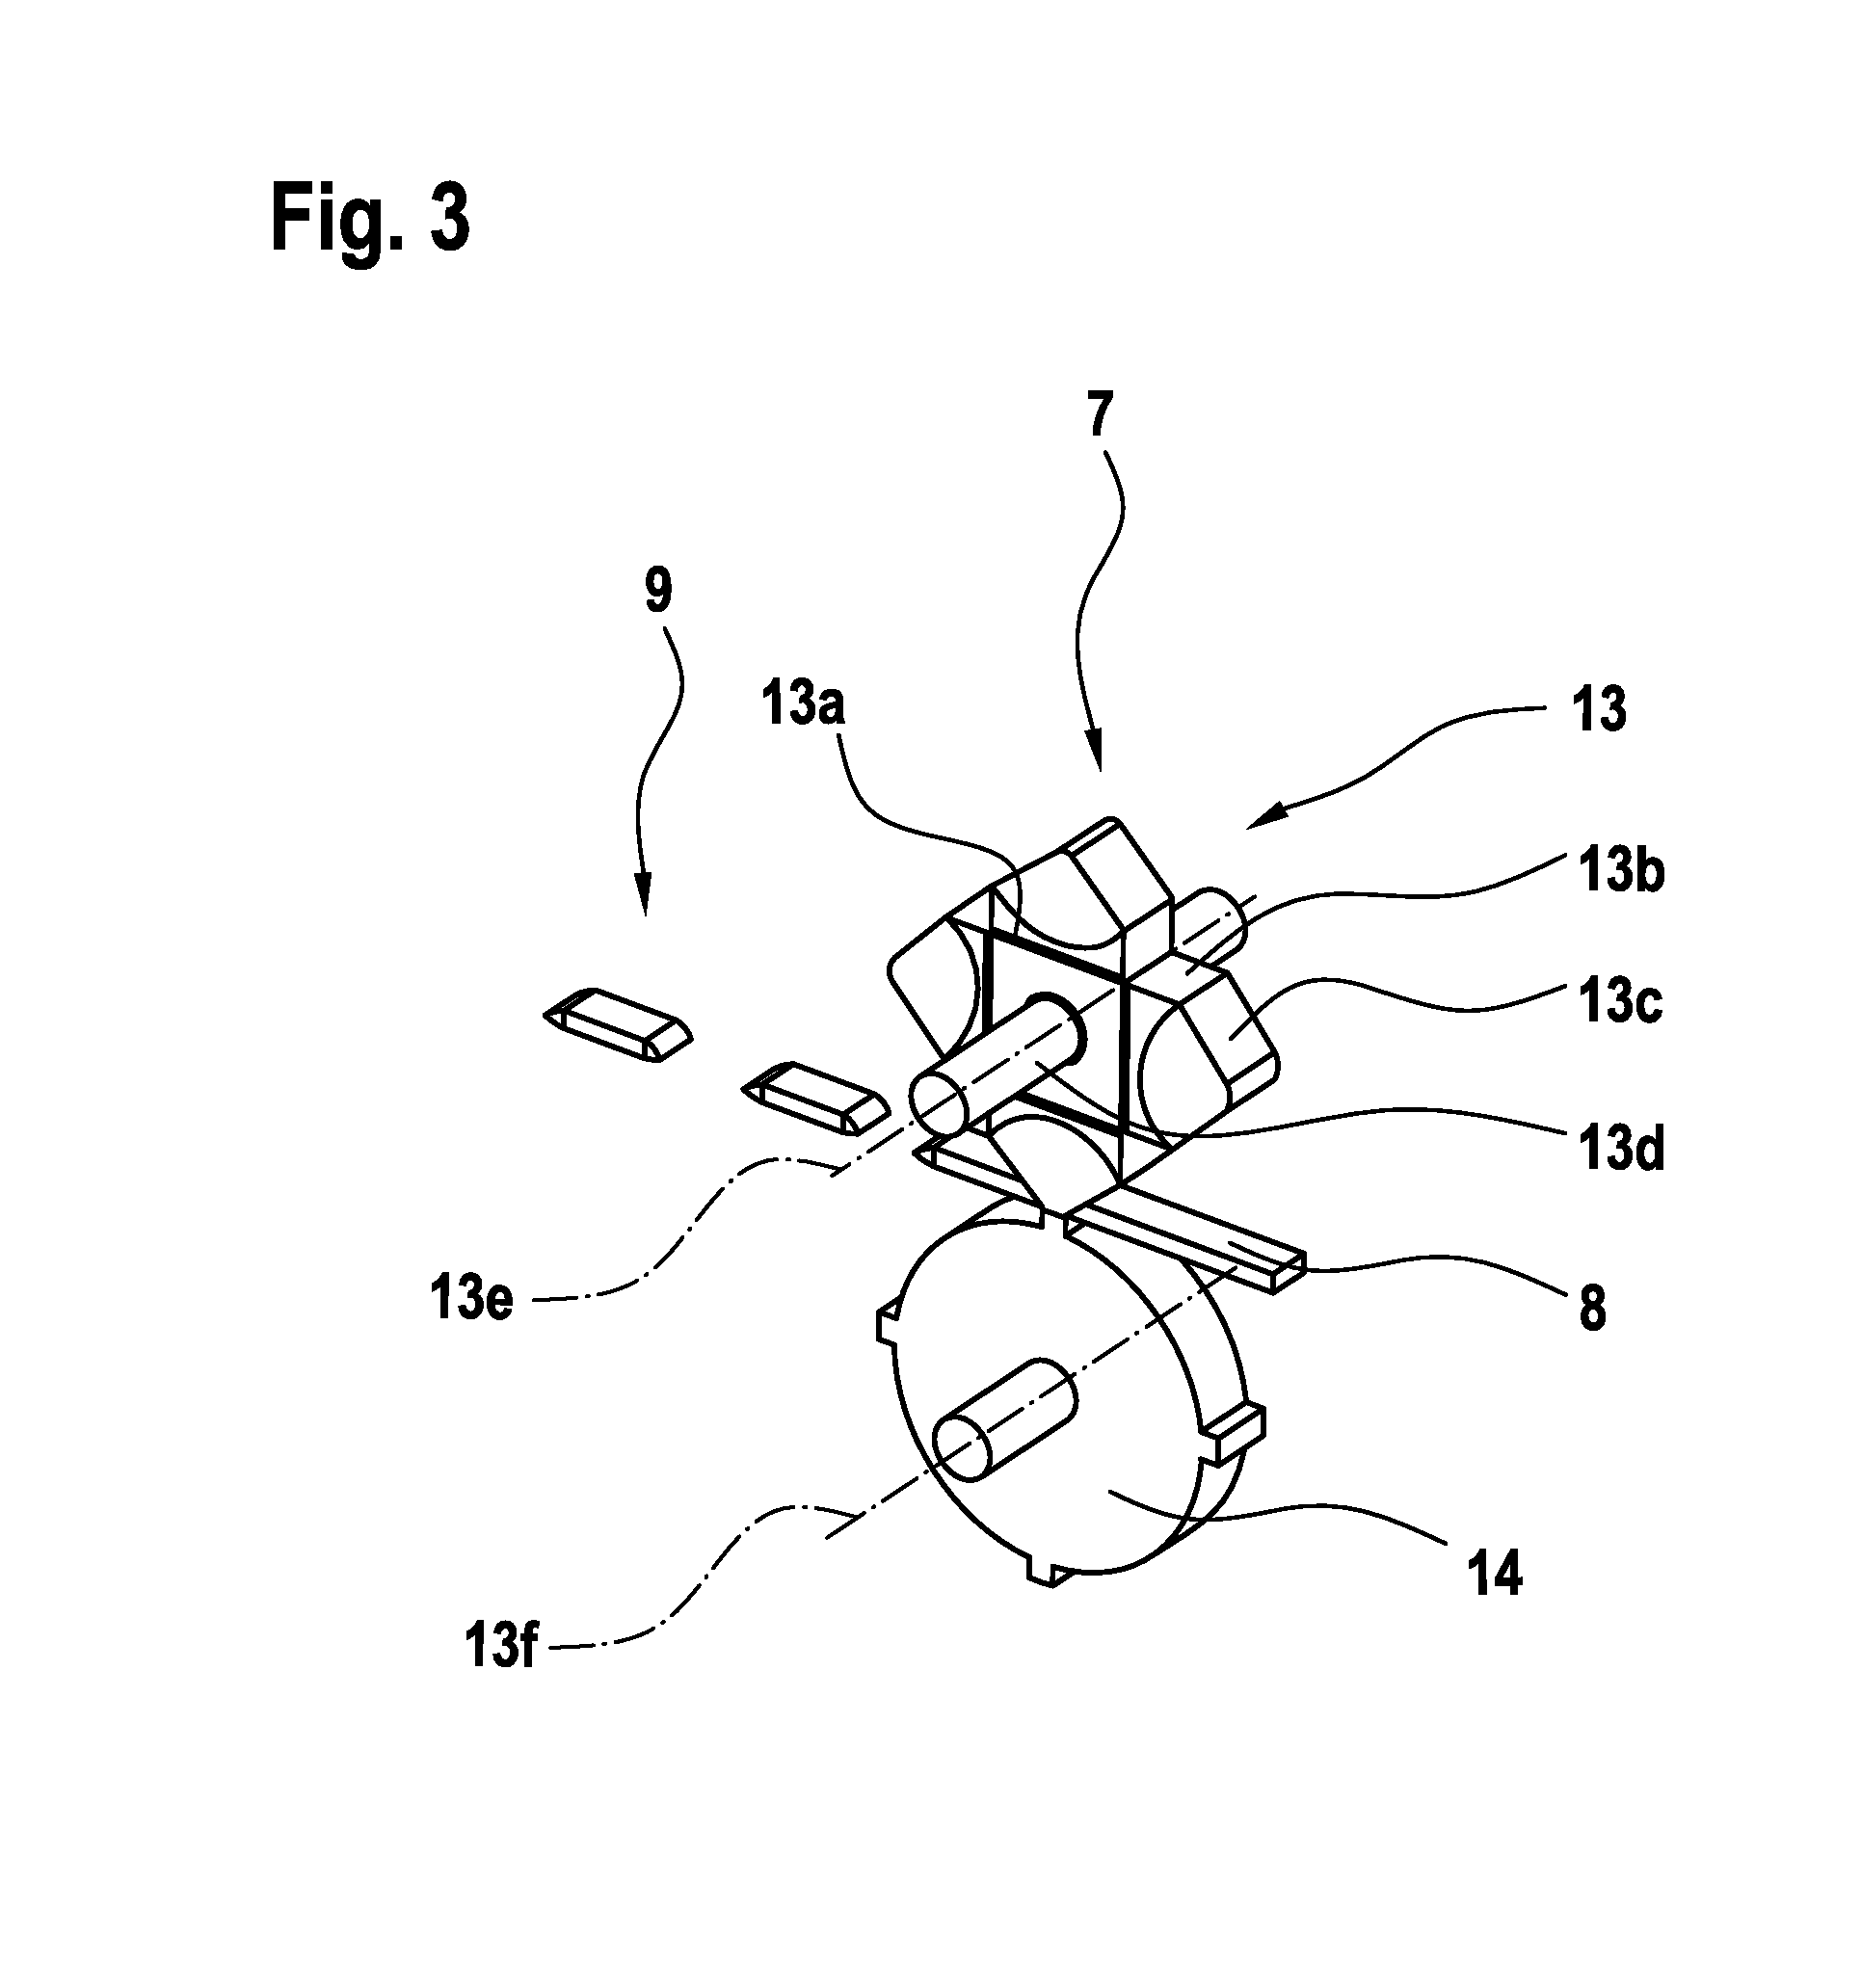 Cross seam joining device for joining a sealing seam for a flexible packaging